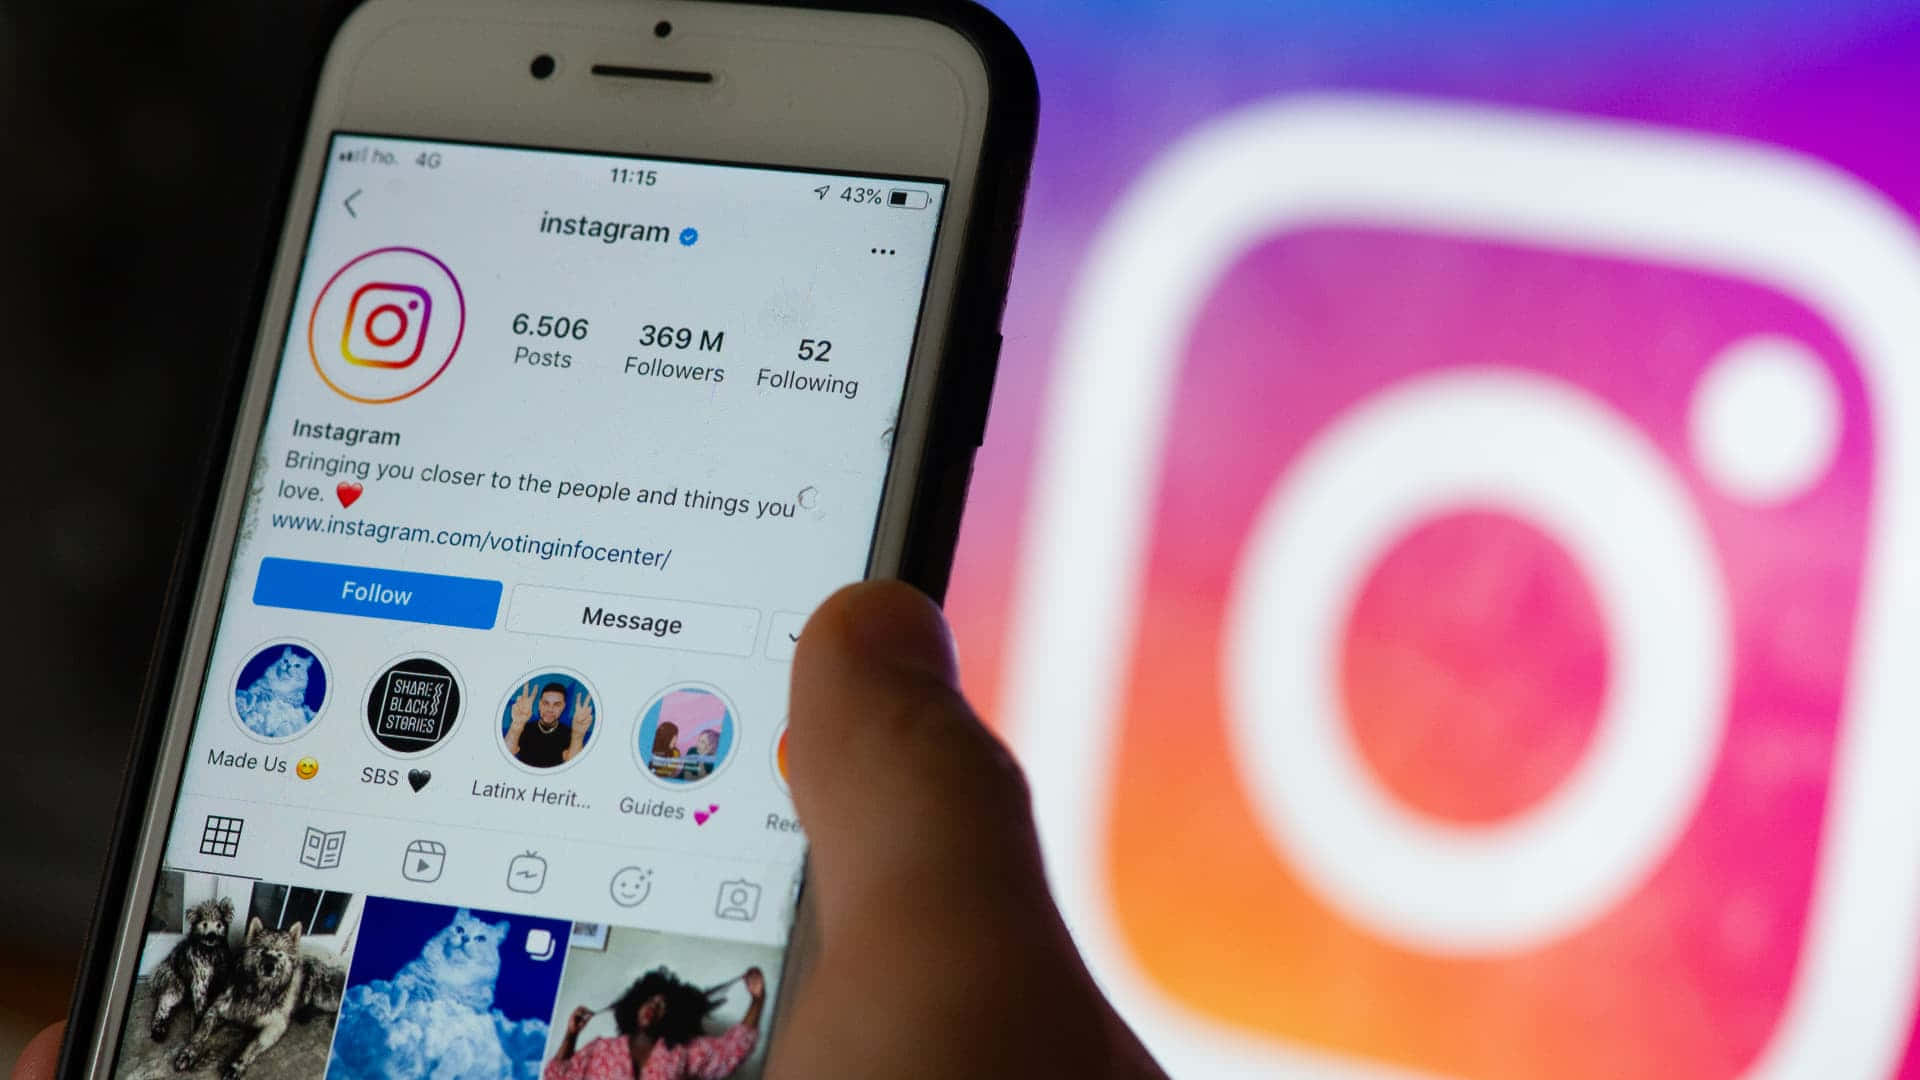 Stay connected with your friends, family, and followers by sharing pictures on Instagram!